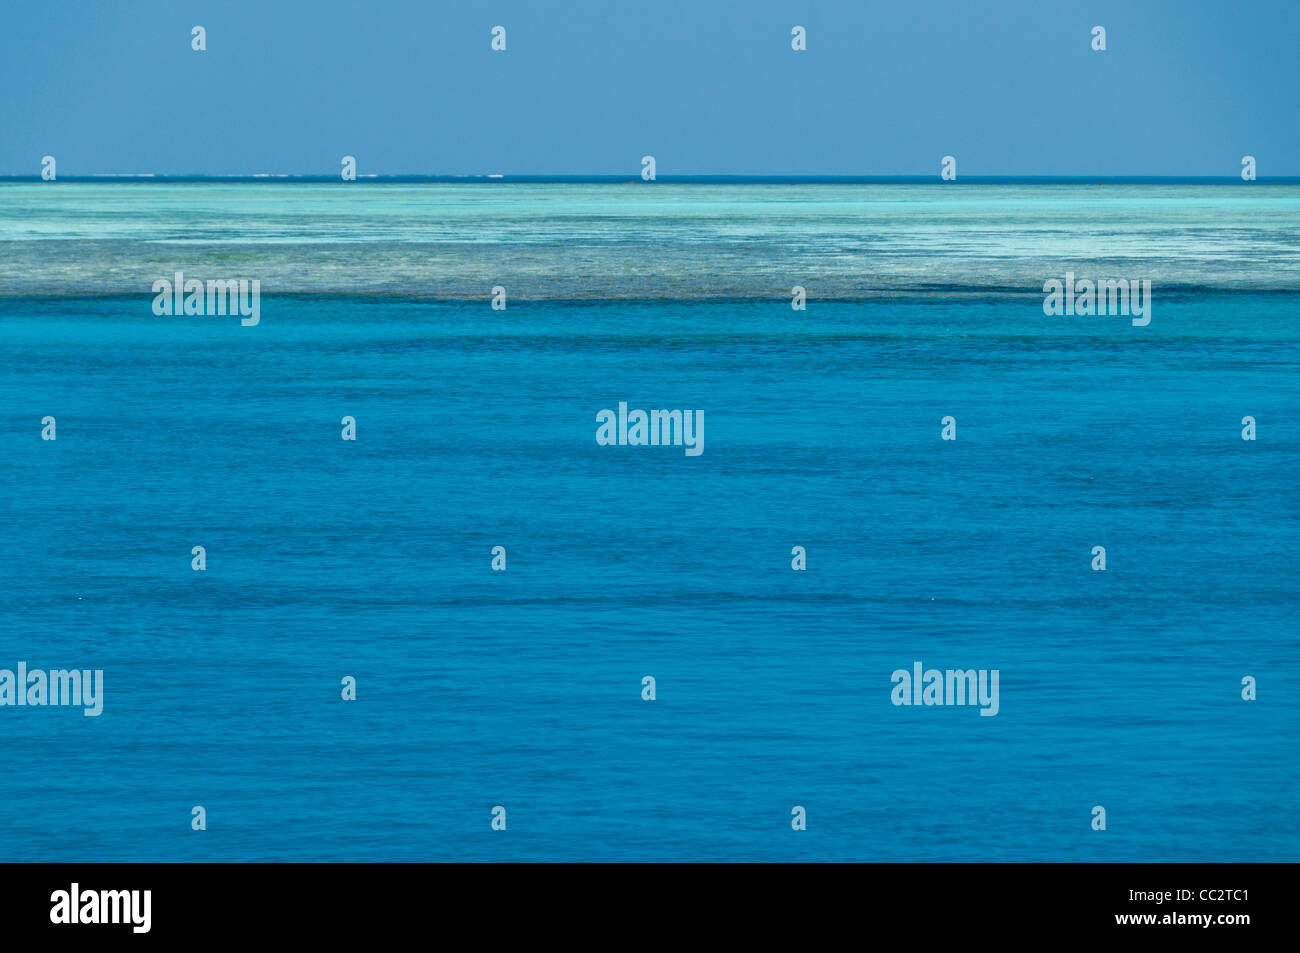 A view of the horizon on the Great Barrier Reef, Australia. The blue water in the bottom part of the frame is deeper water with a mostly sandy bottom. Beyond that, the darker area is a mix of shallow reef and sand just below the surface of the water. The shallow reef provides a natural barrier against waves and swells. This particular shot was taken about 150 miles northeast of Gladstone on Swains Reef, about 115 miles offshore. Stock Photo